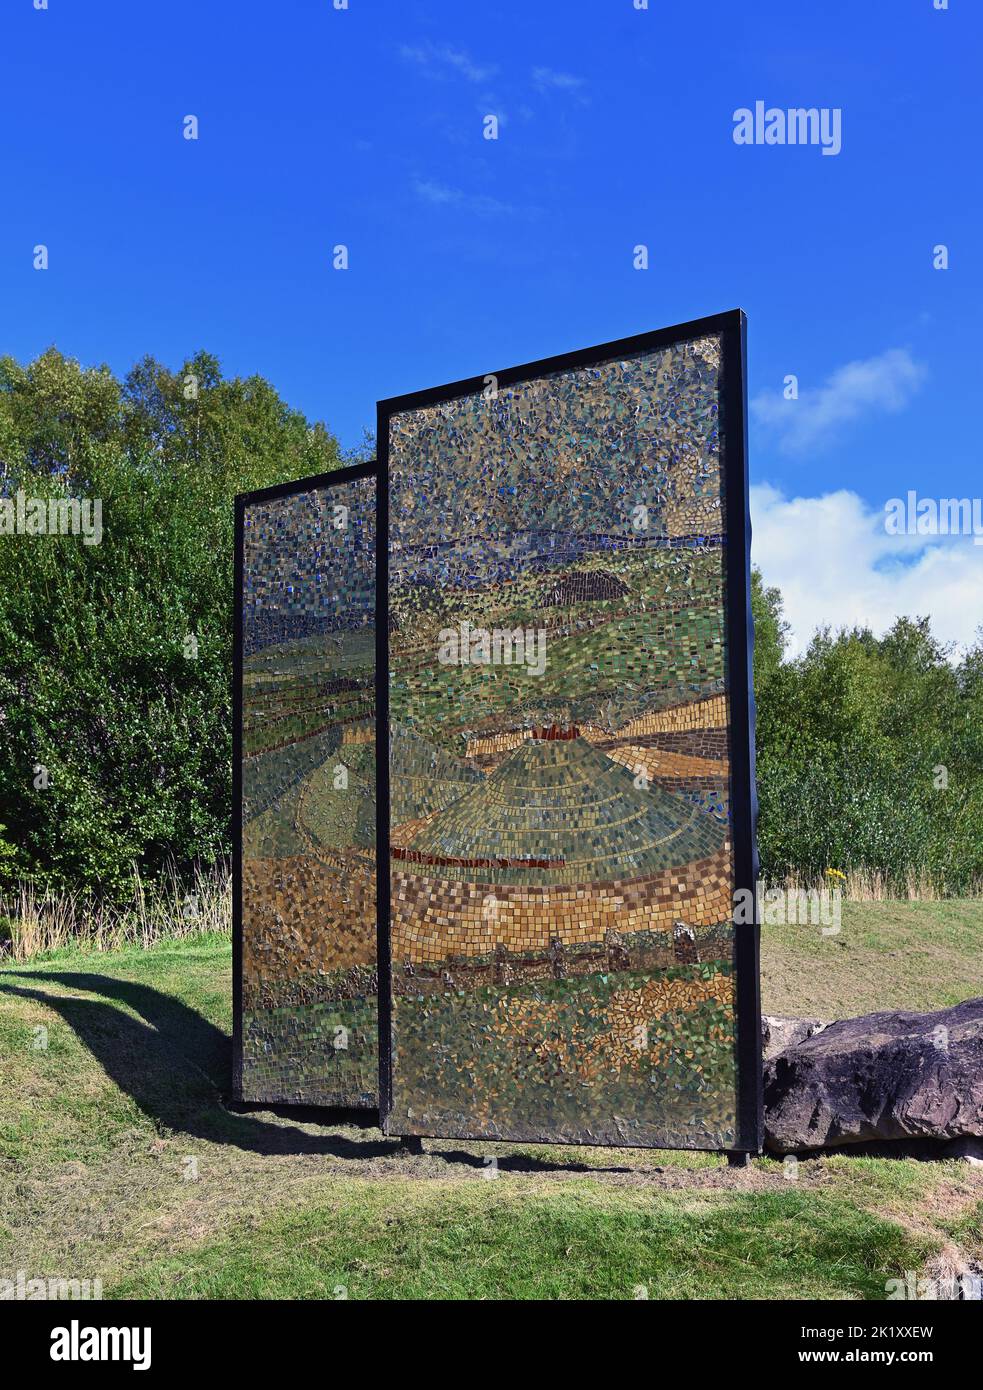 Mosaic landscape, outdoor artwork by Charles Jencks. Crawick Multiverse, Sanquhar, Dumfries and Galloway, Scotland, United Kingdom, Europe. Stock Photo